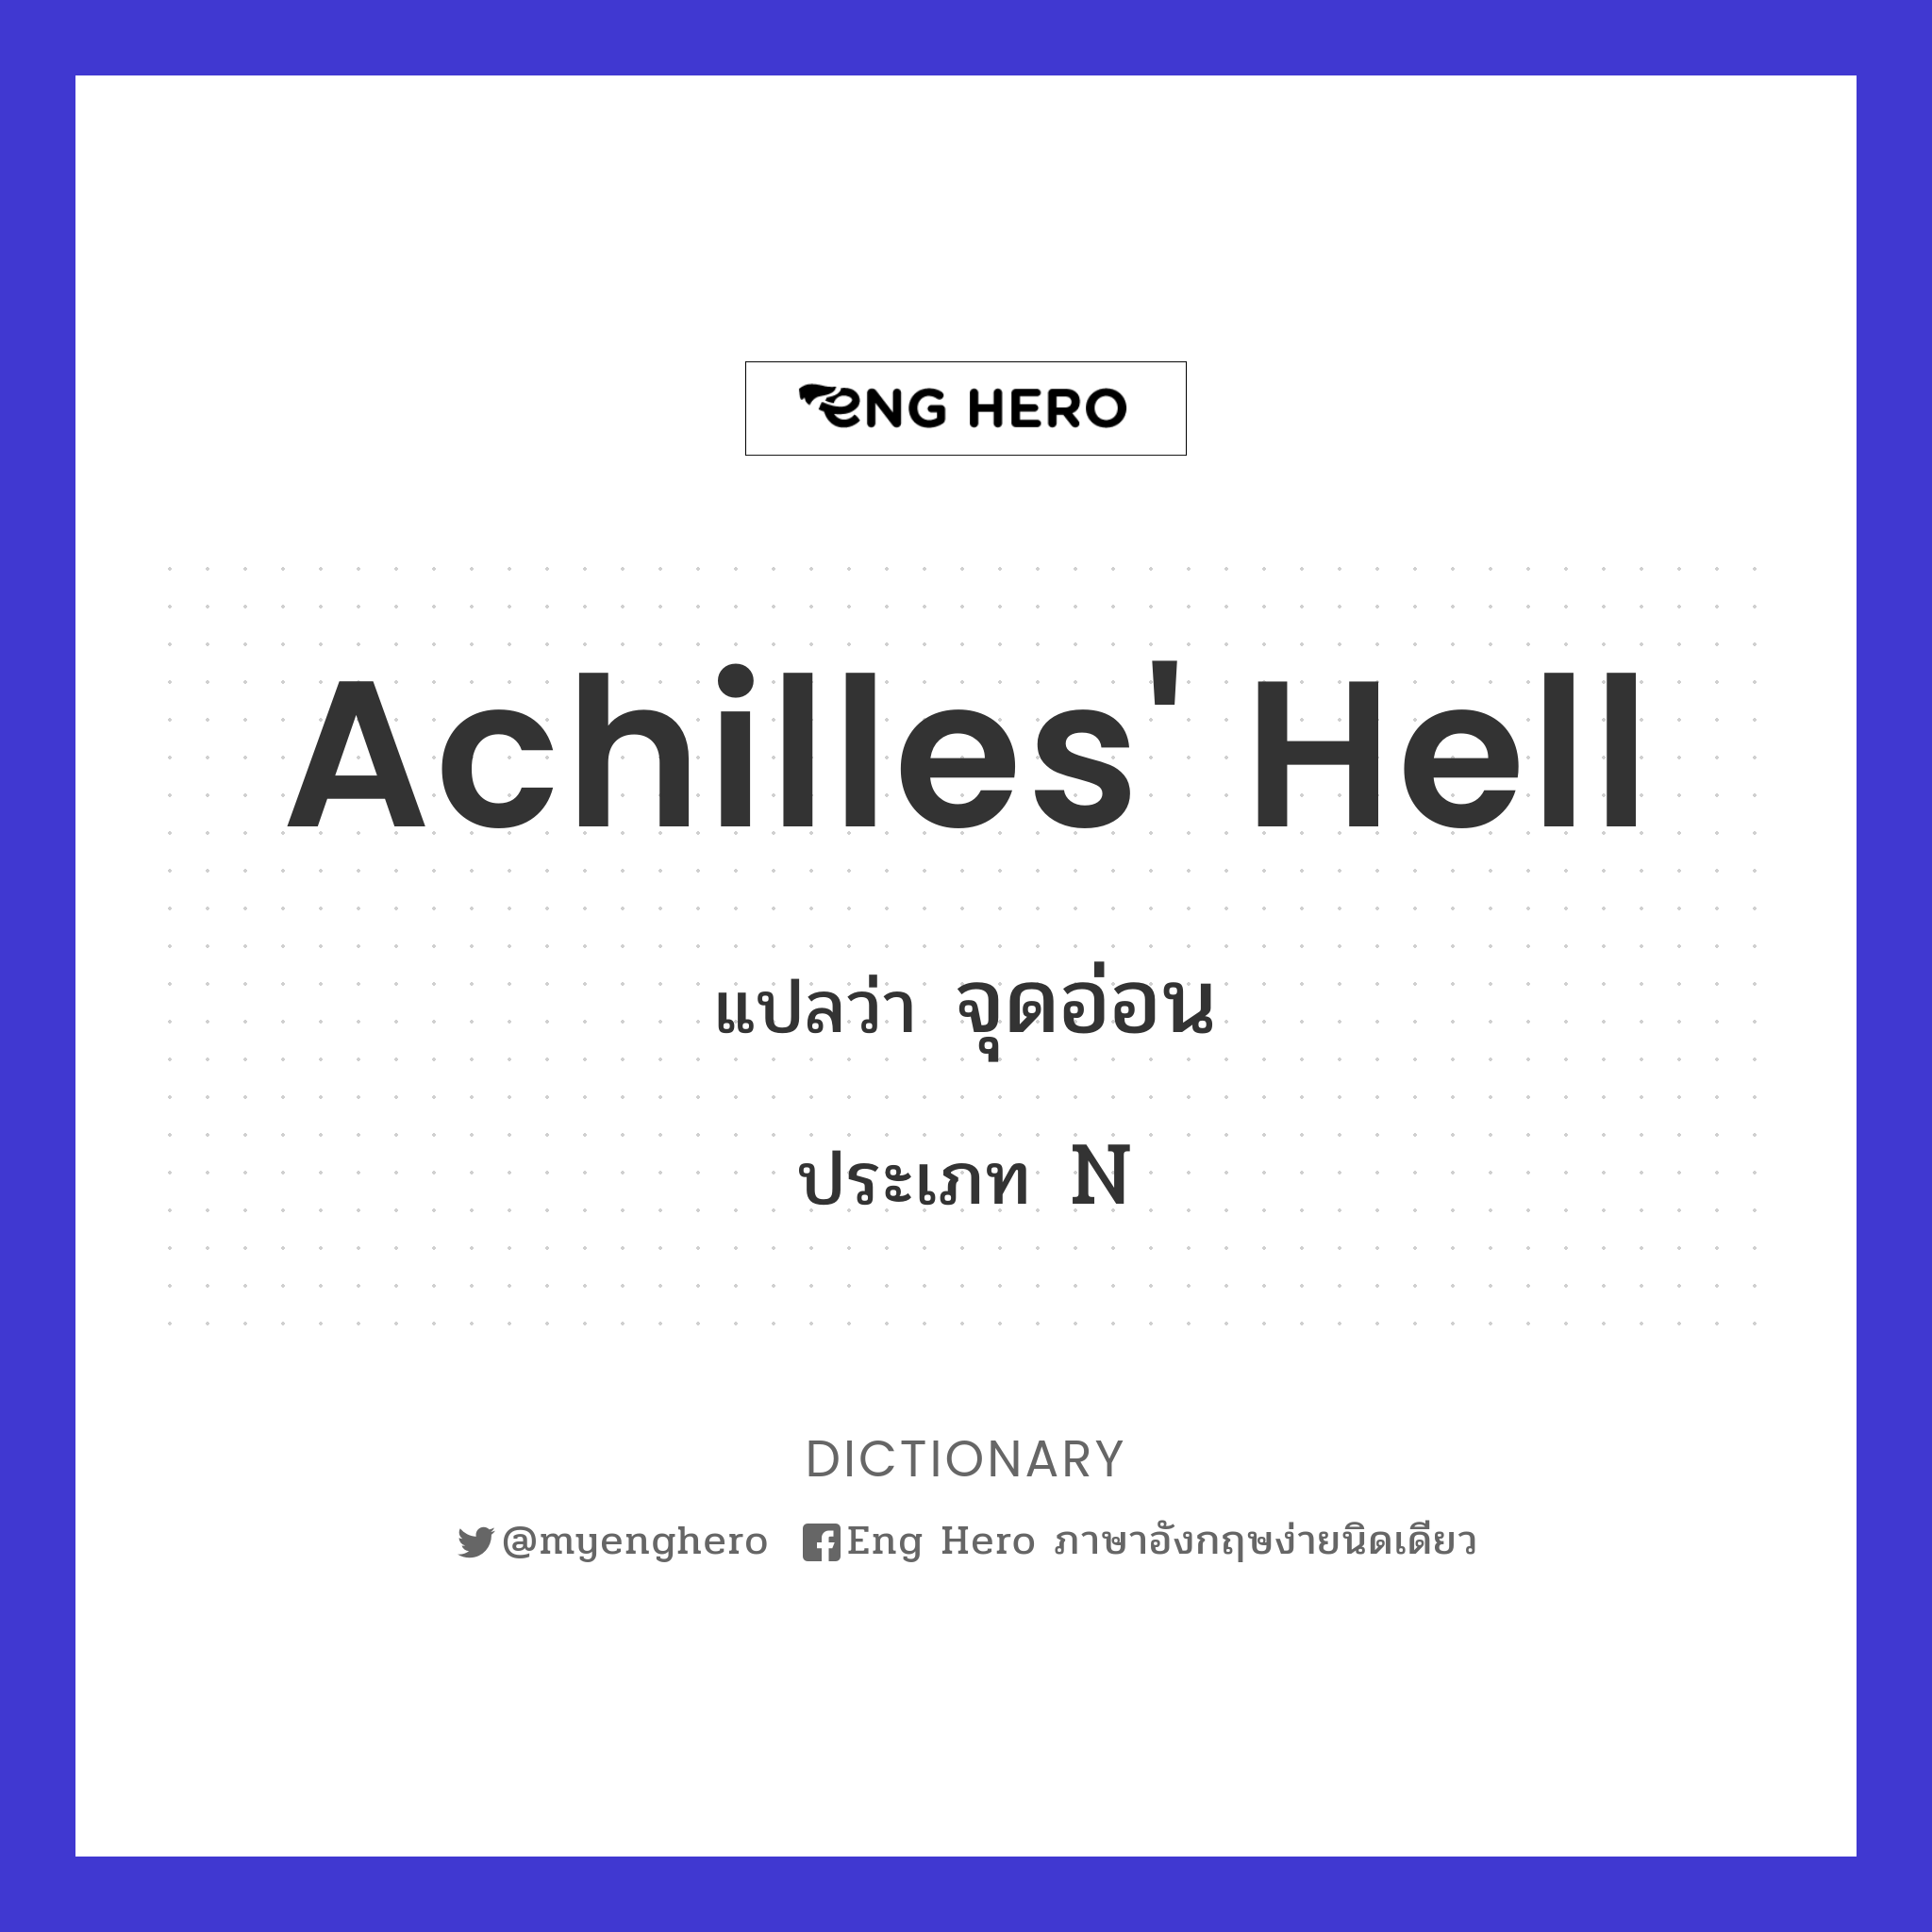 Achilles' hell